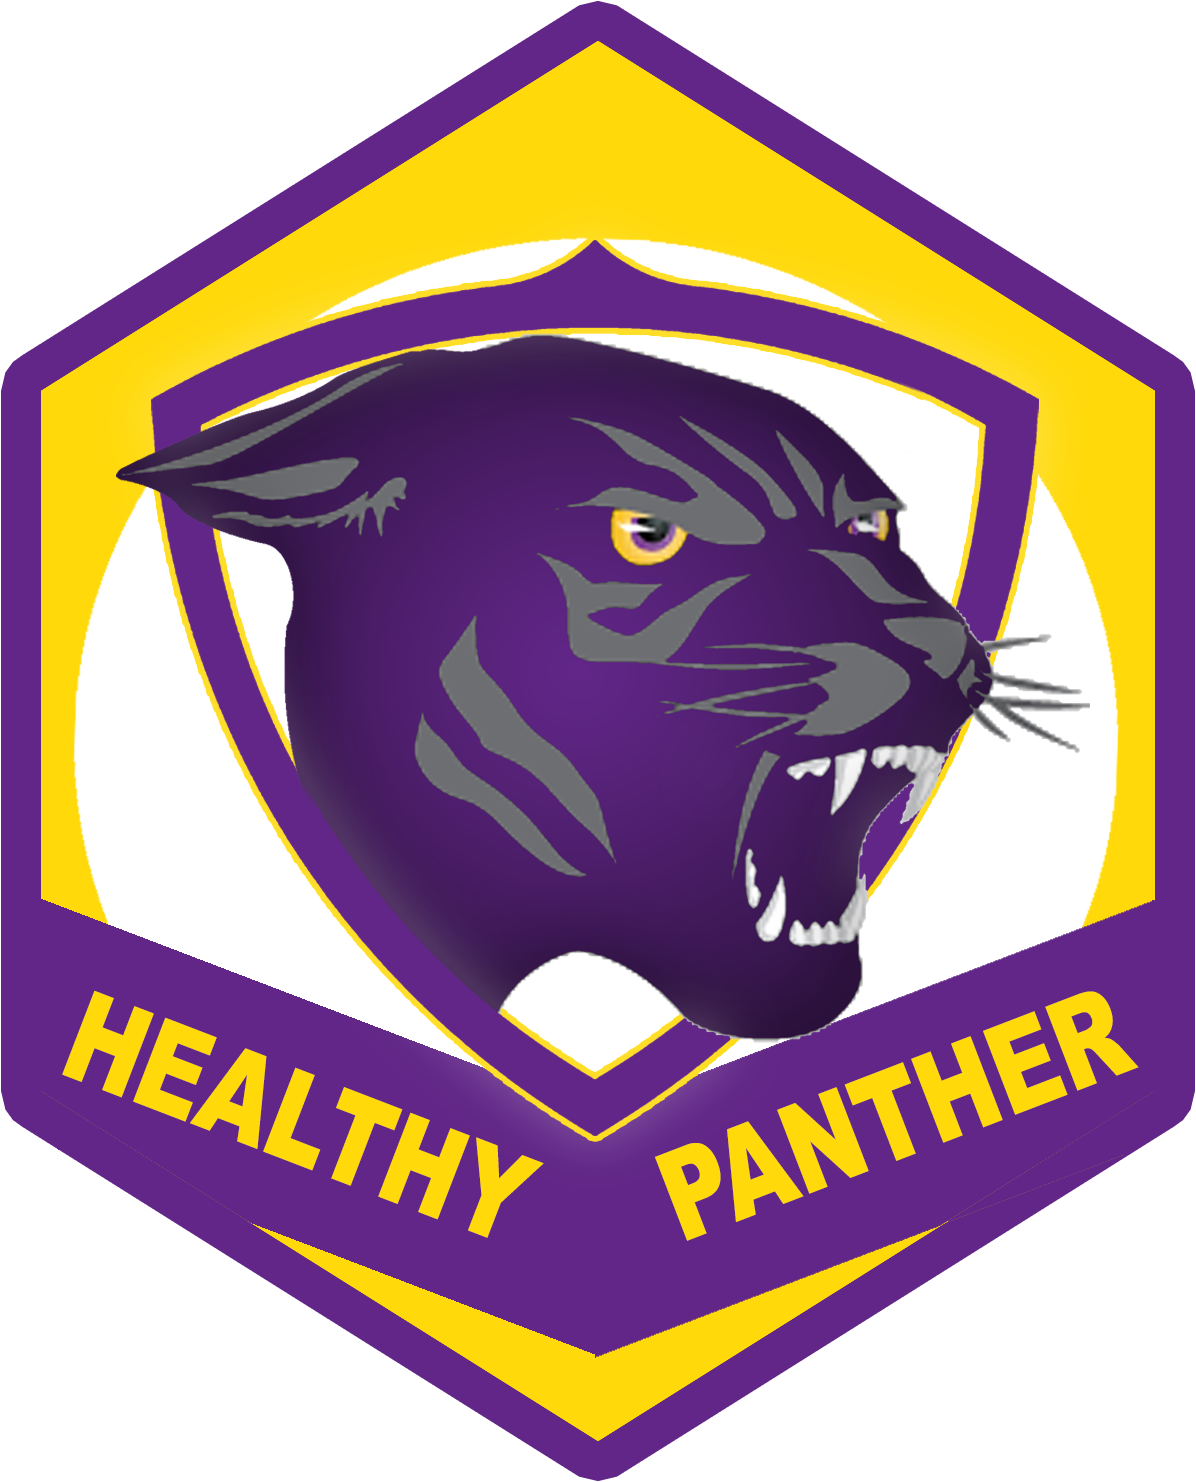 Healthy Panther Badge